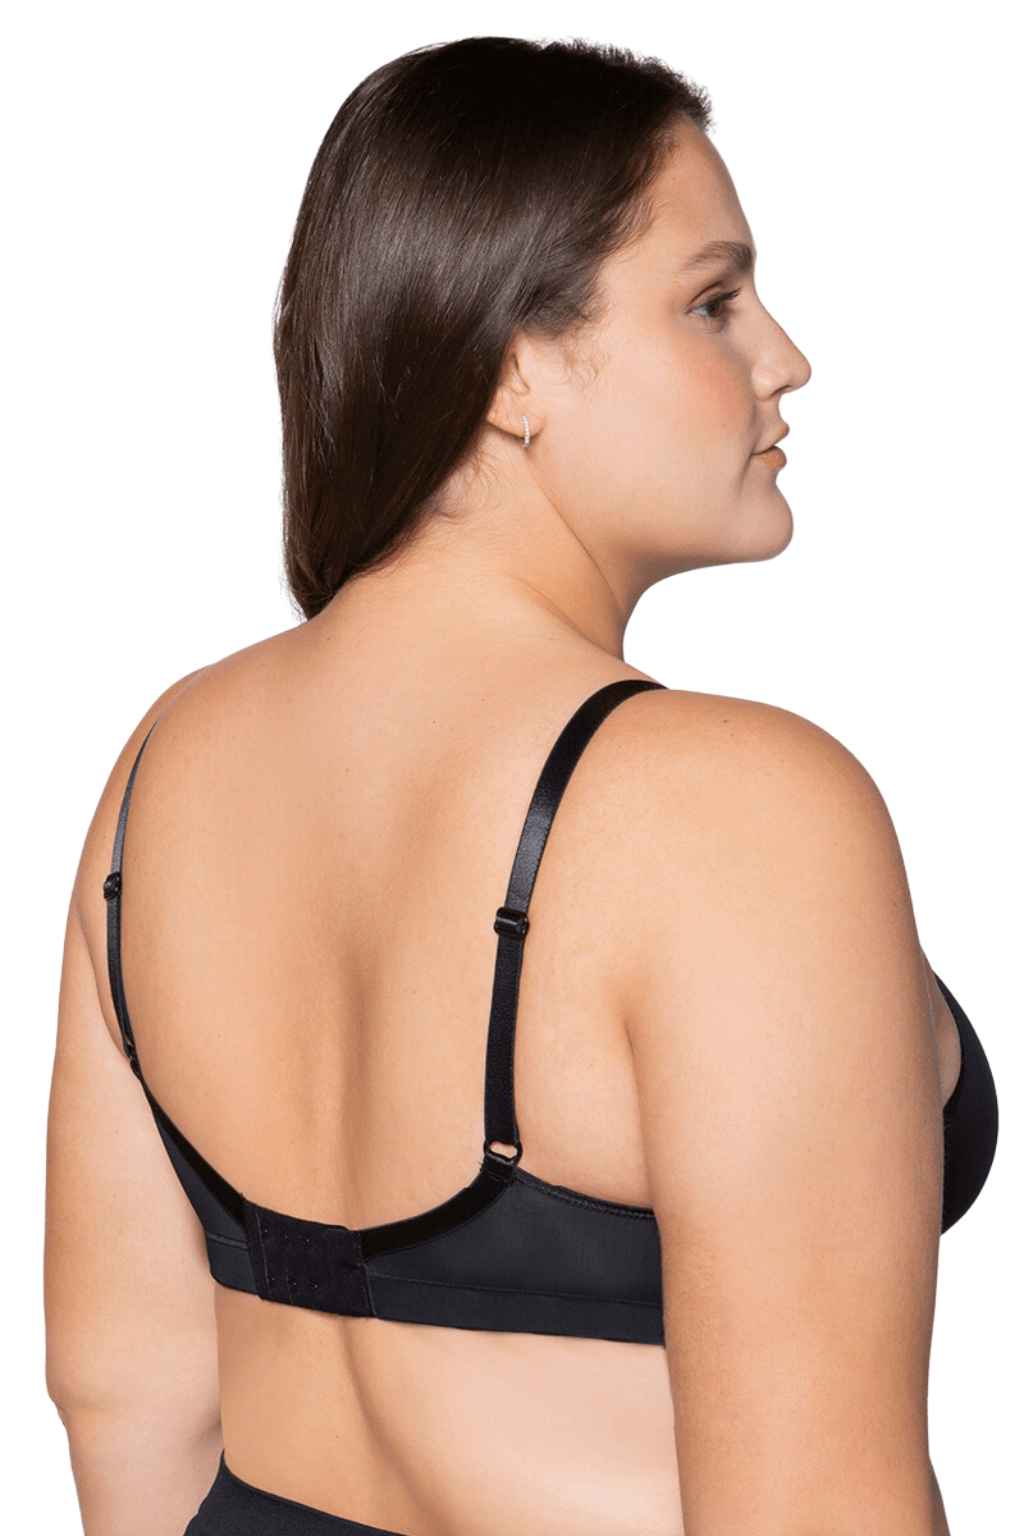 Plus Size Hoop Firmer Mold Support Bra With Rim